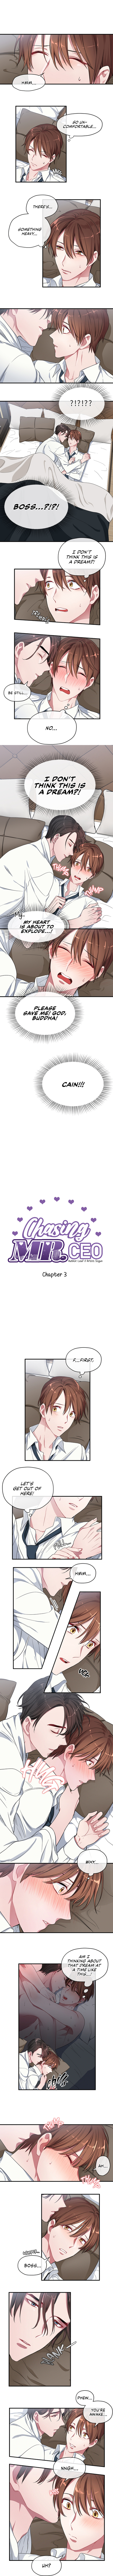 Chasing Mr. Ceo - Page 2